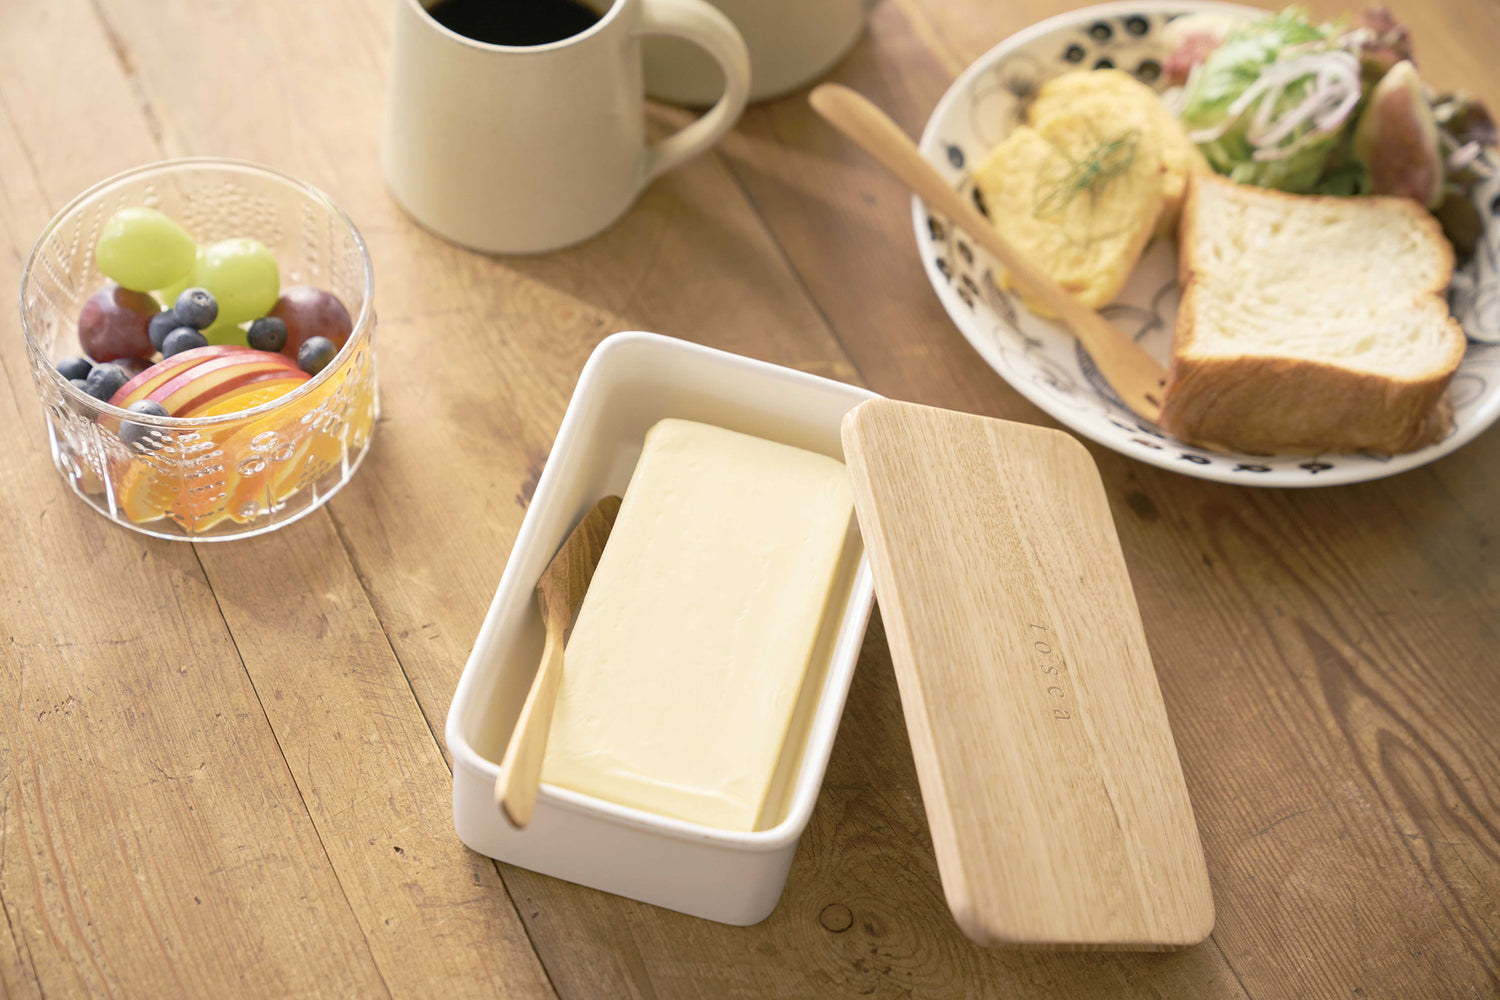 View 6 - Aerial view of ceramic butter dish holding butter on breakfast table by Yamazaki Home.